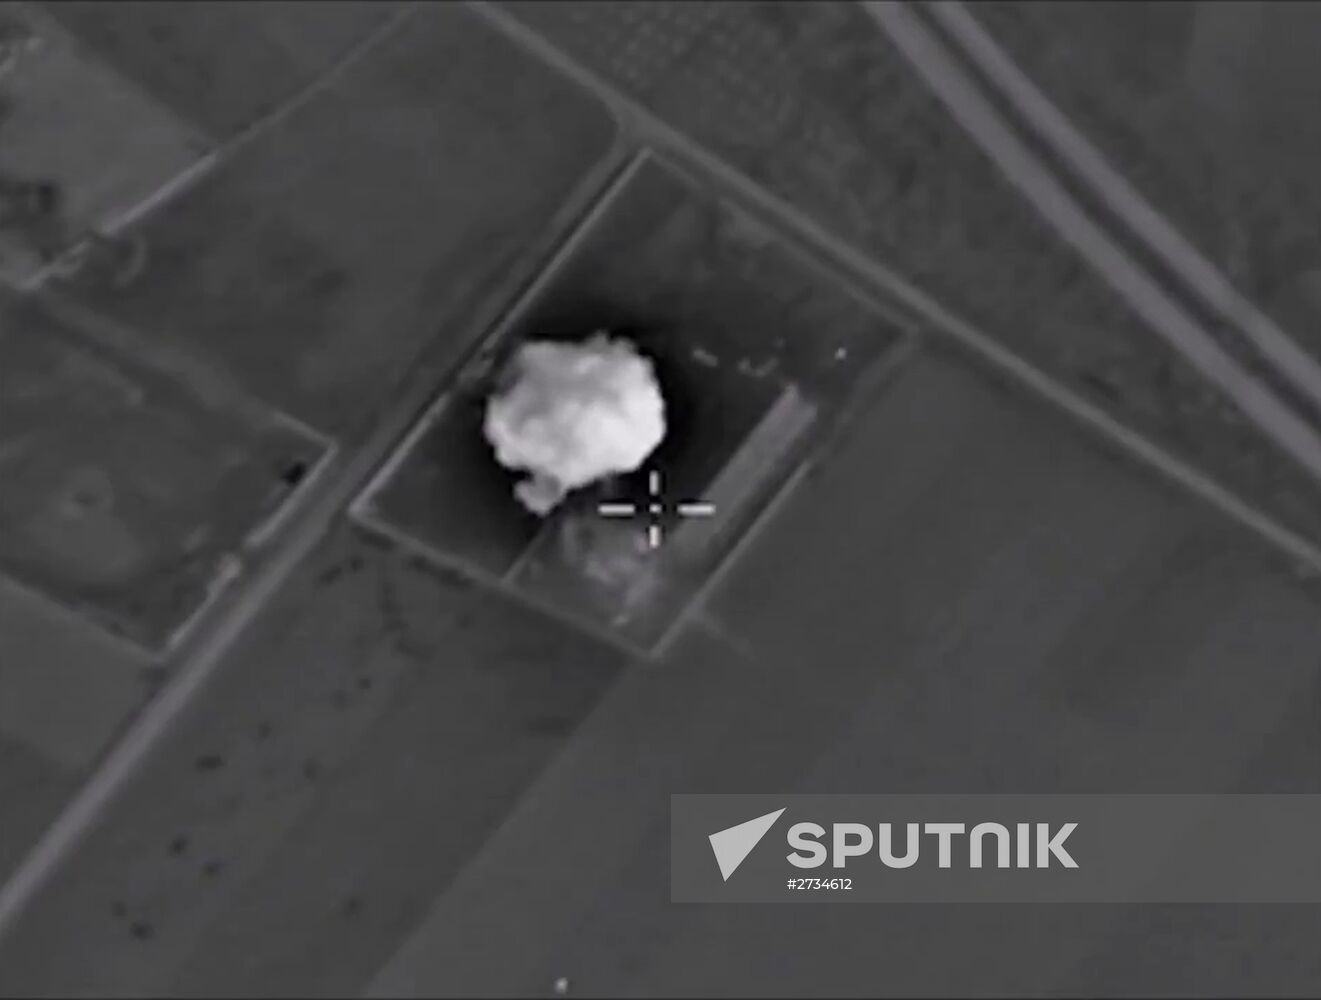 Russian Aerospace Forces carry out strikes on ISIS positions in Syria